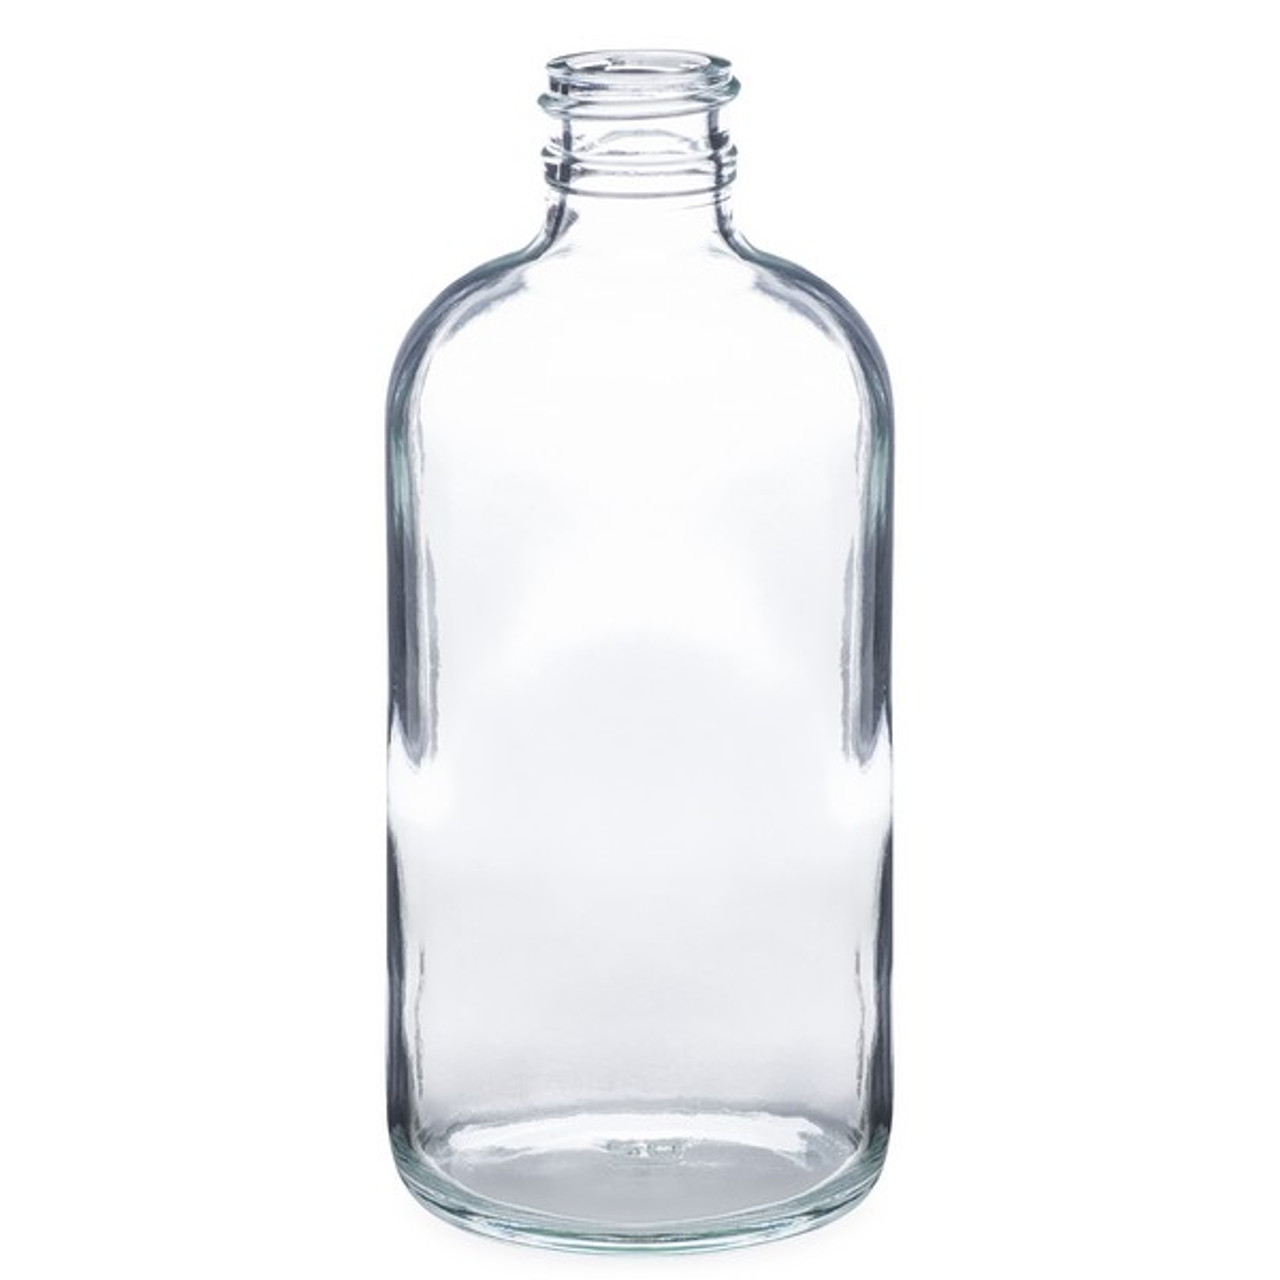 8 oz Clear Glass Boston Round Bottles (Cap Not Included) - 4699B09-BCLR